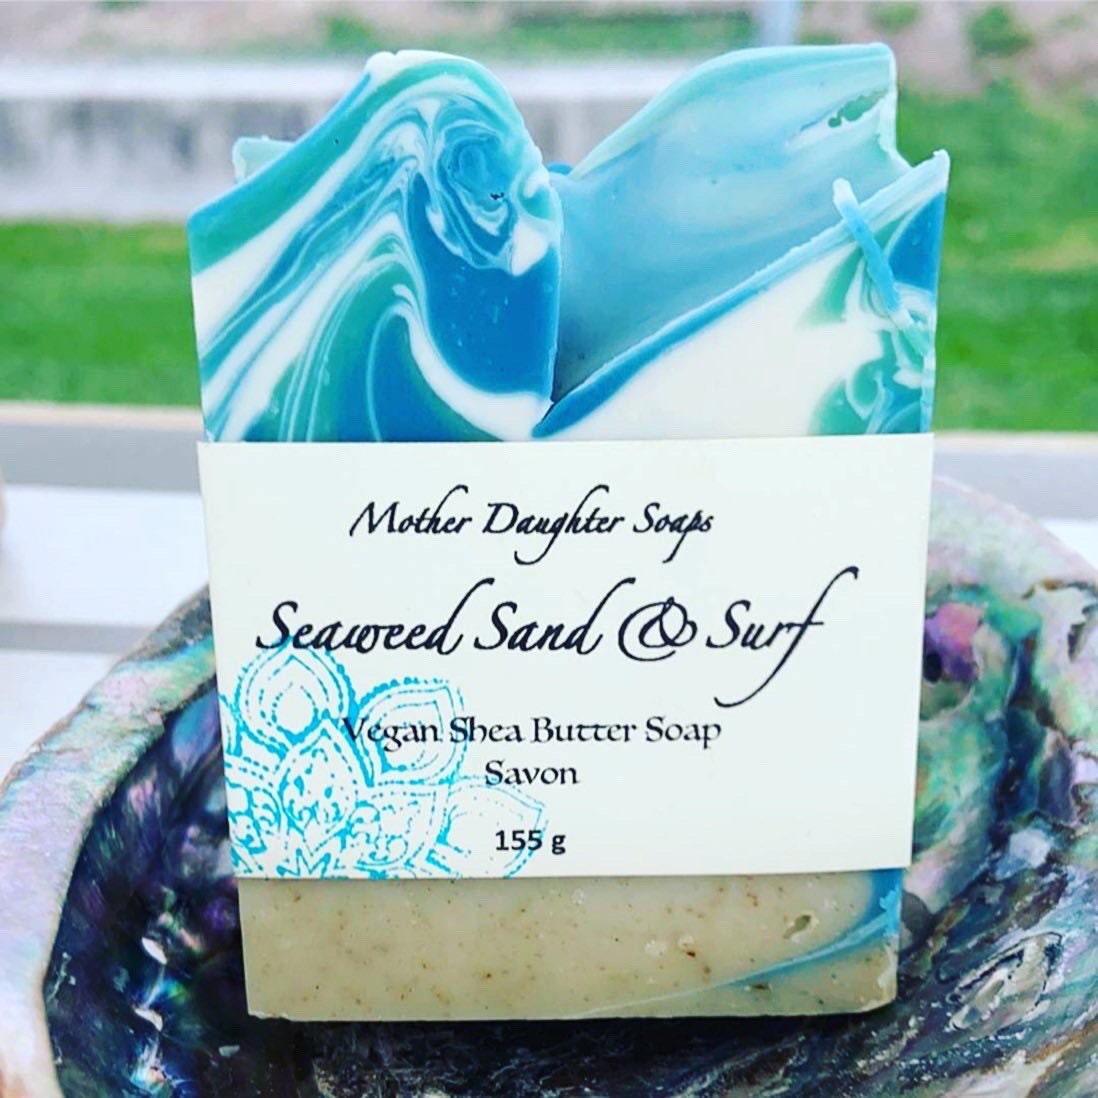 Seaweed Sand & Surf/Organic Shea Butter/Peppermint/Eucalyptus/Spearmint Essential oils/Handcrafted on Vancouver Island, Victoria, B.C.Canada